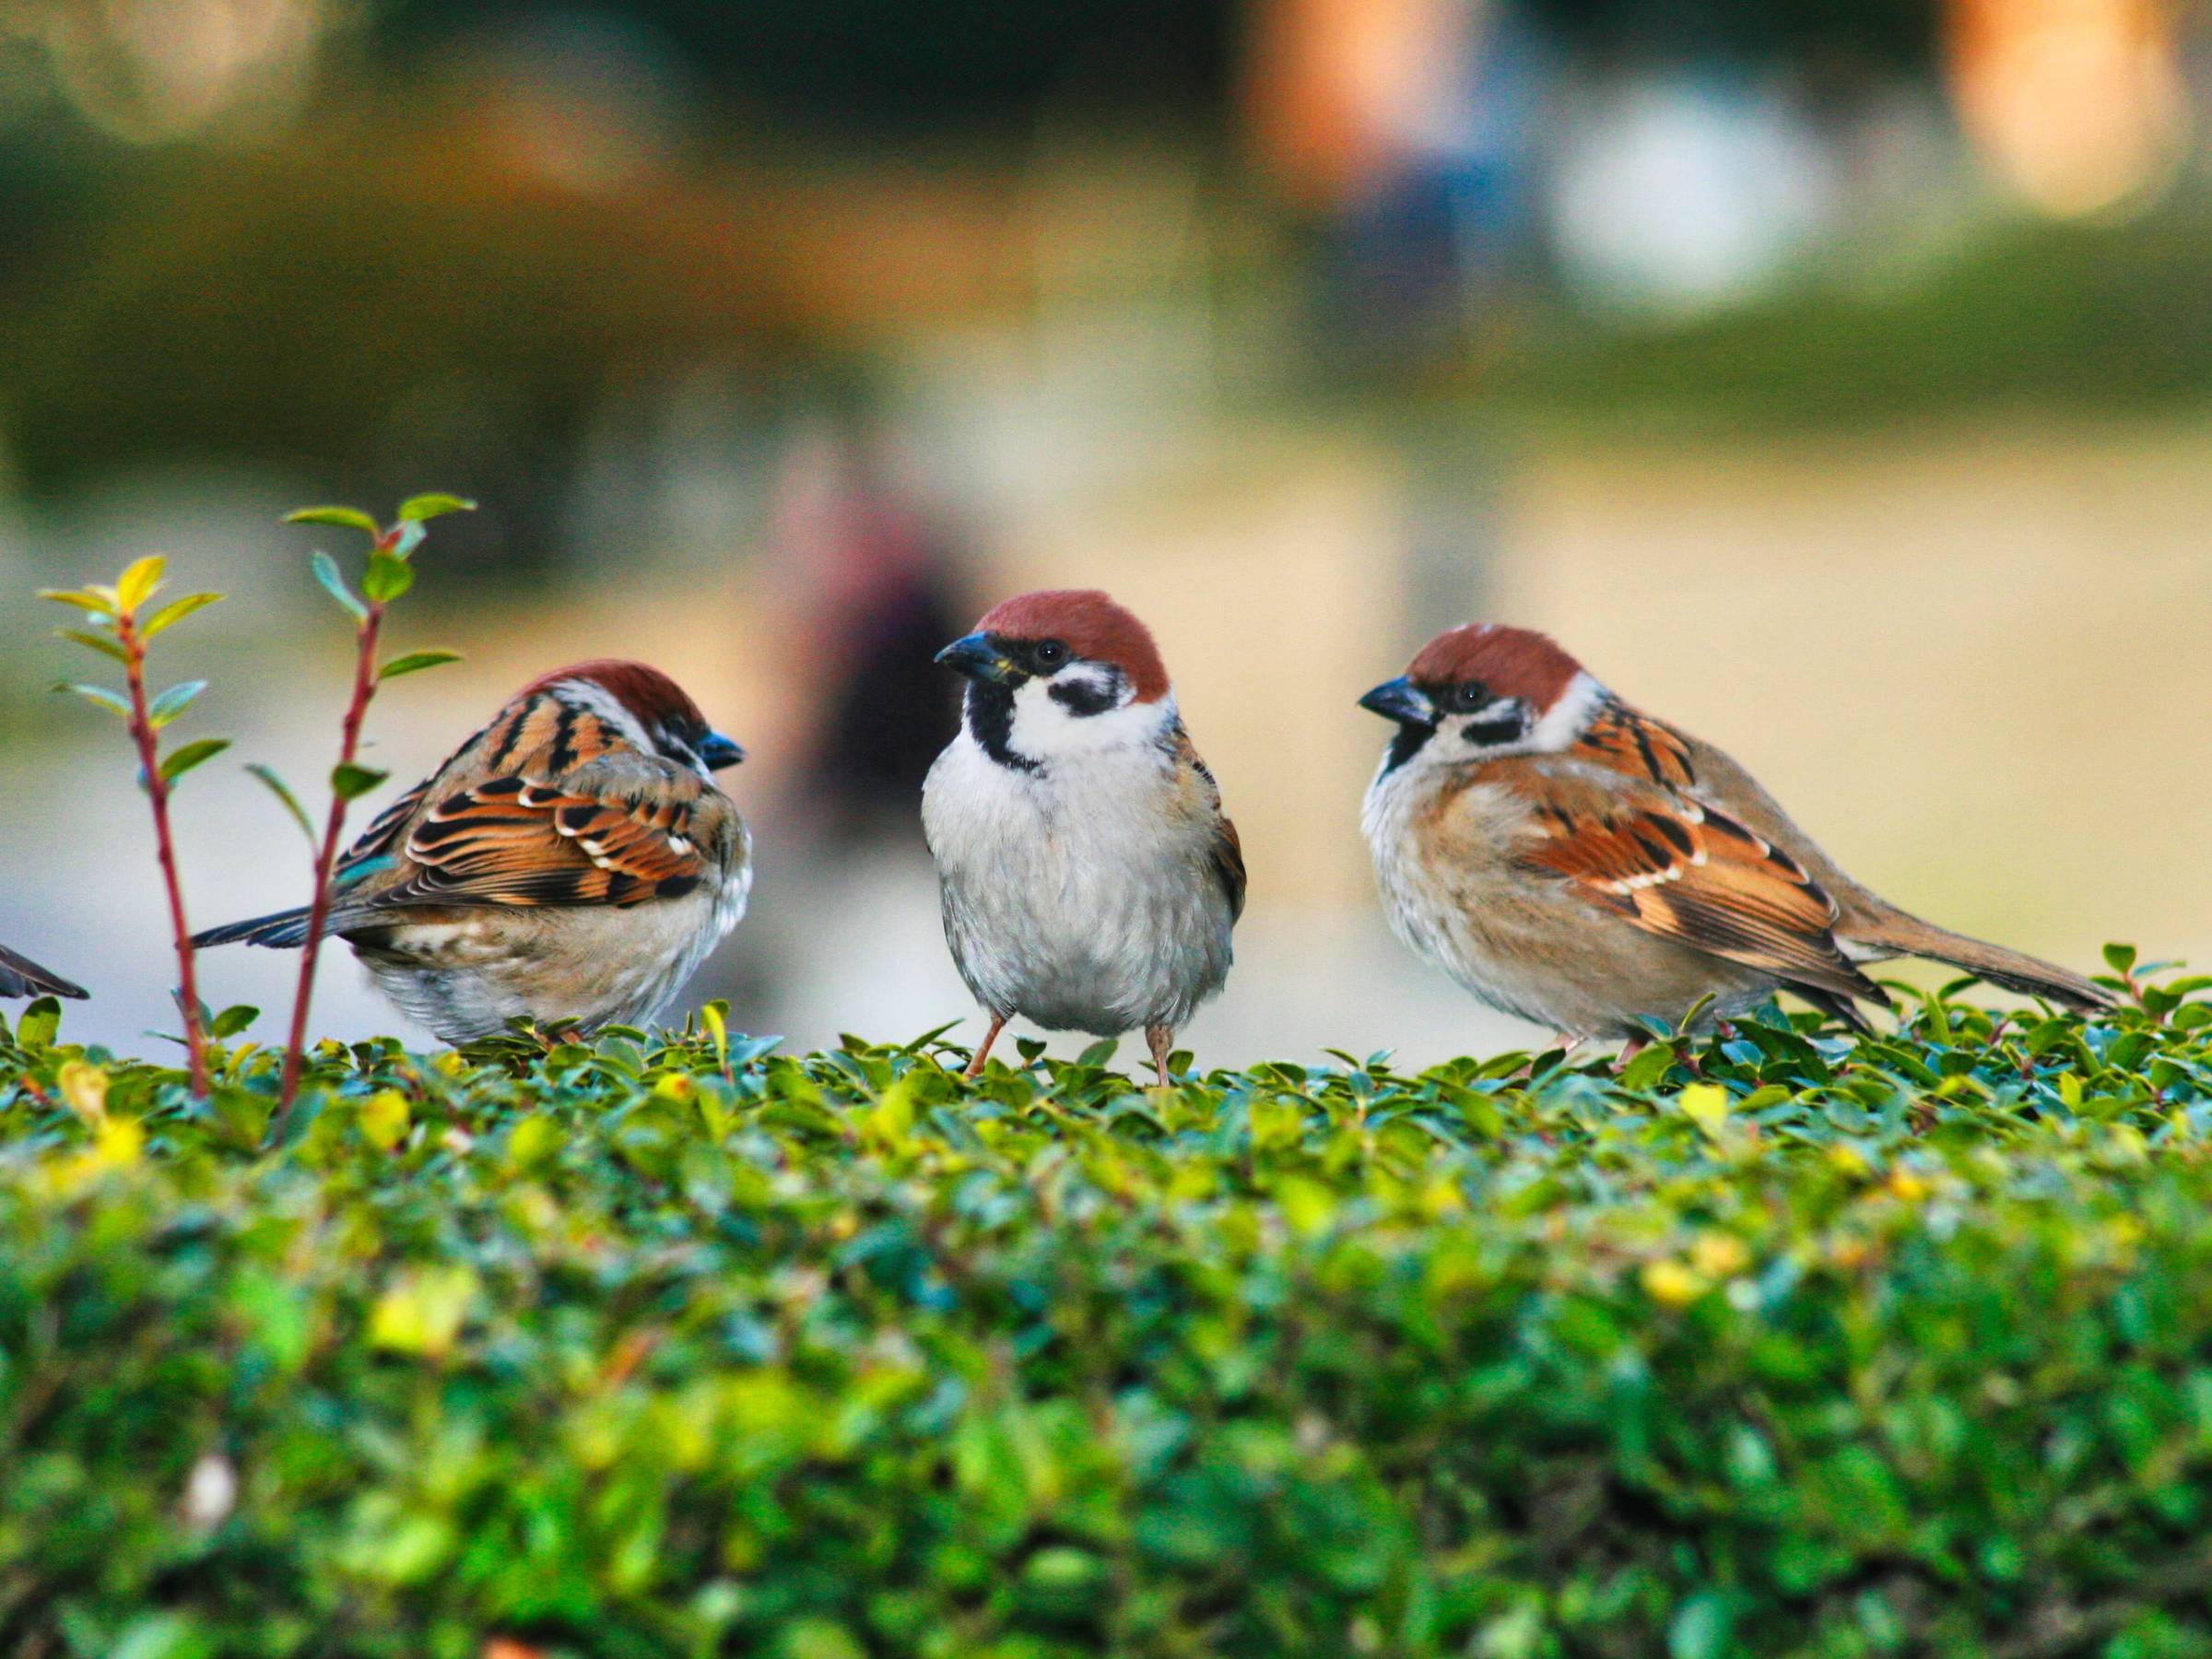 Sparrow Control & Deterrent Services in NYC